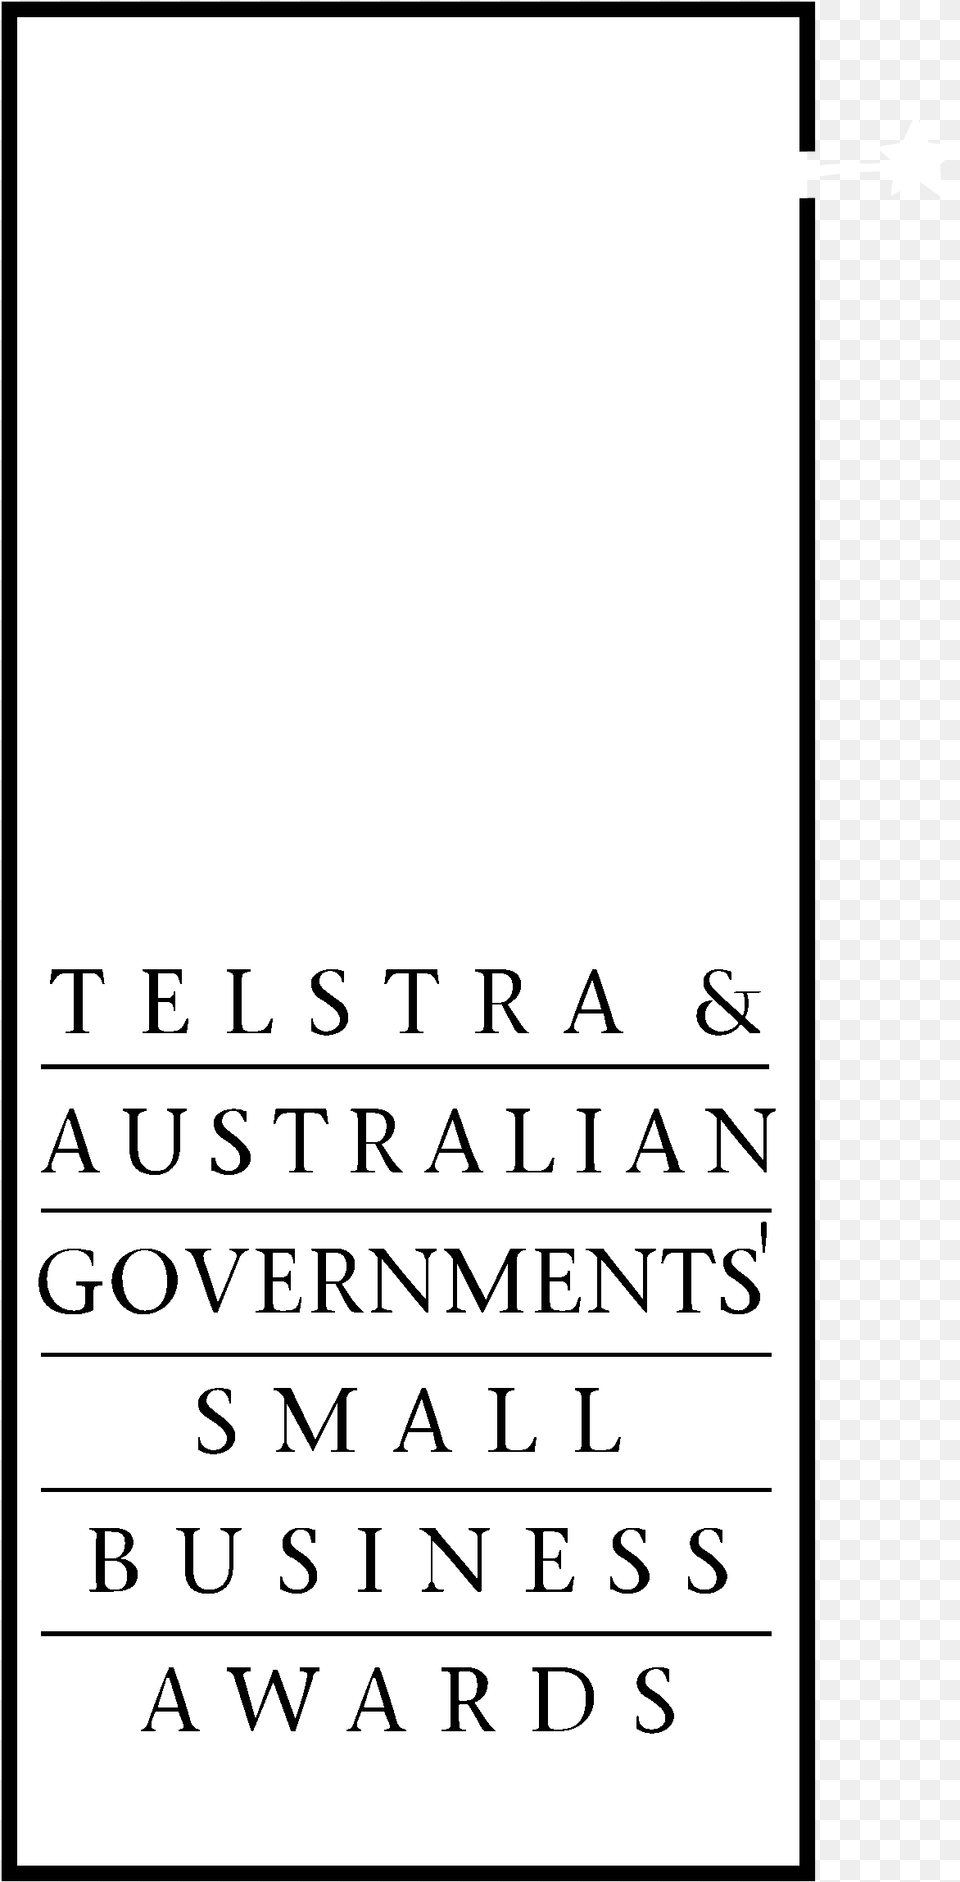 The Telstra Amp Australian Governments House Doctor, Text Png Image